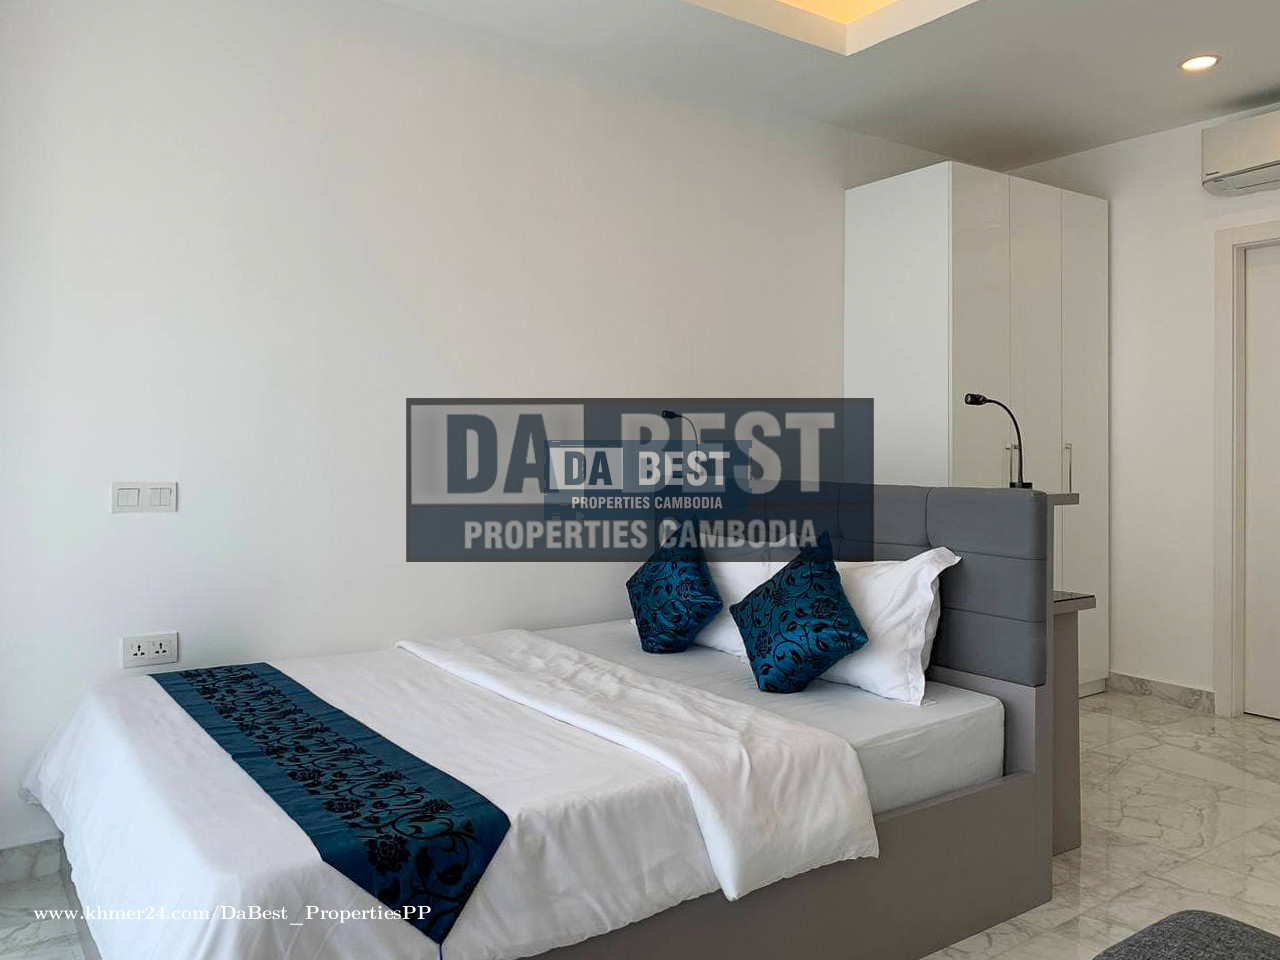 DABEST PROPERTIES: Spacious Studio High Floor for Rent with Gym, Swimming pool in Phnom Penh